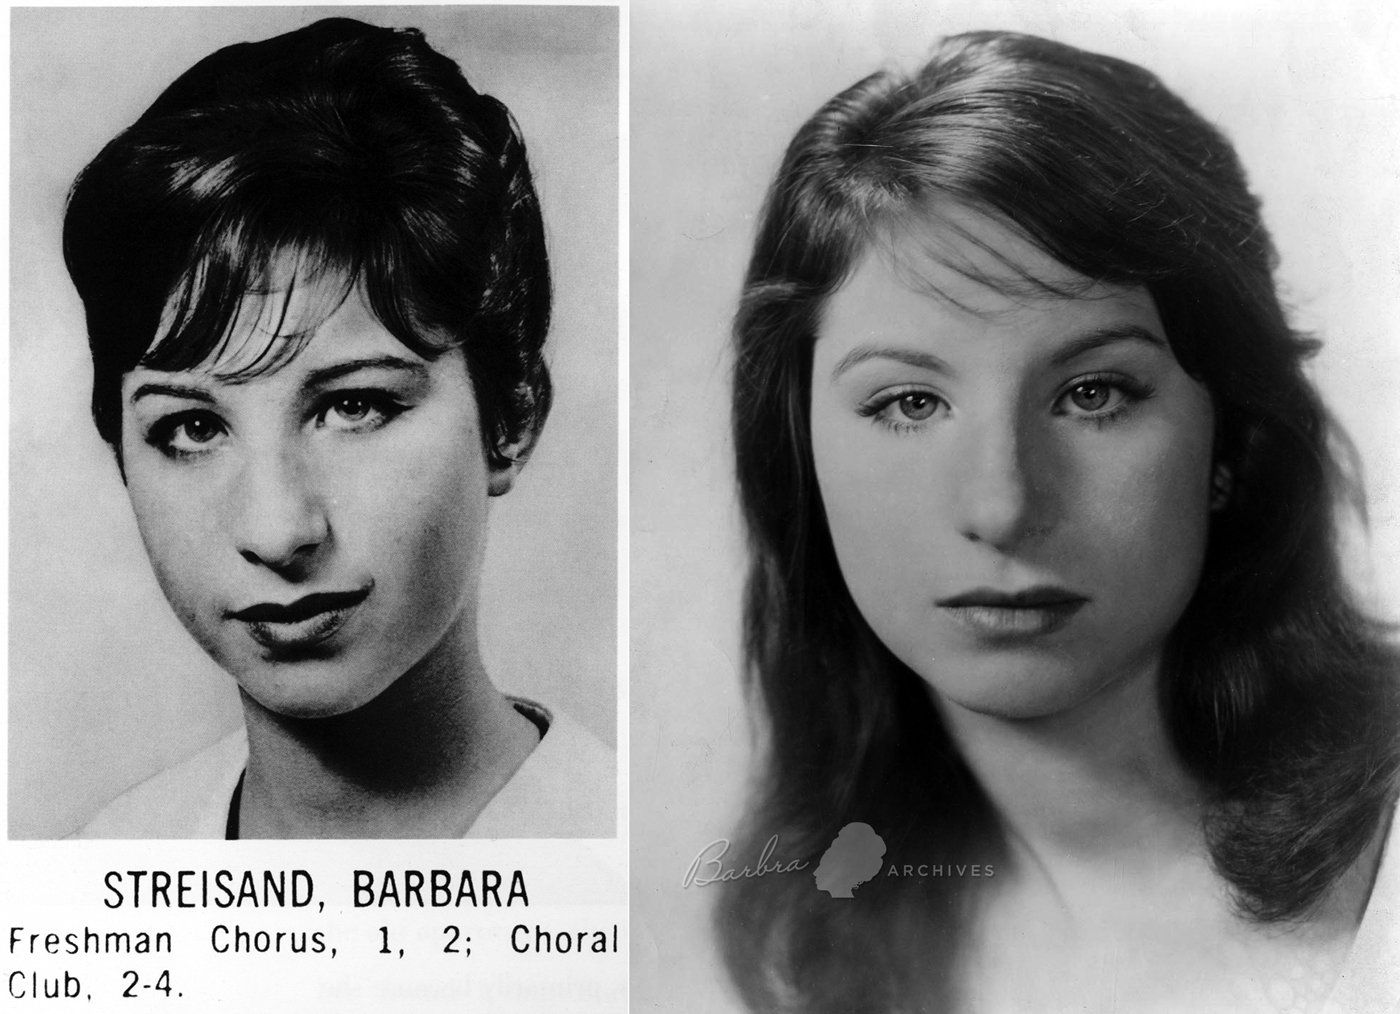 Streisand's High School yearbook photo and another photo of her as a teenager.